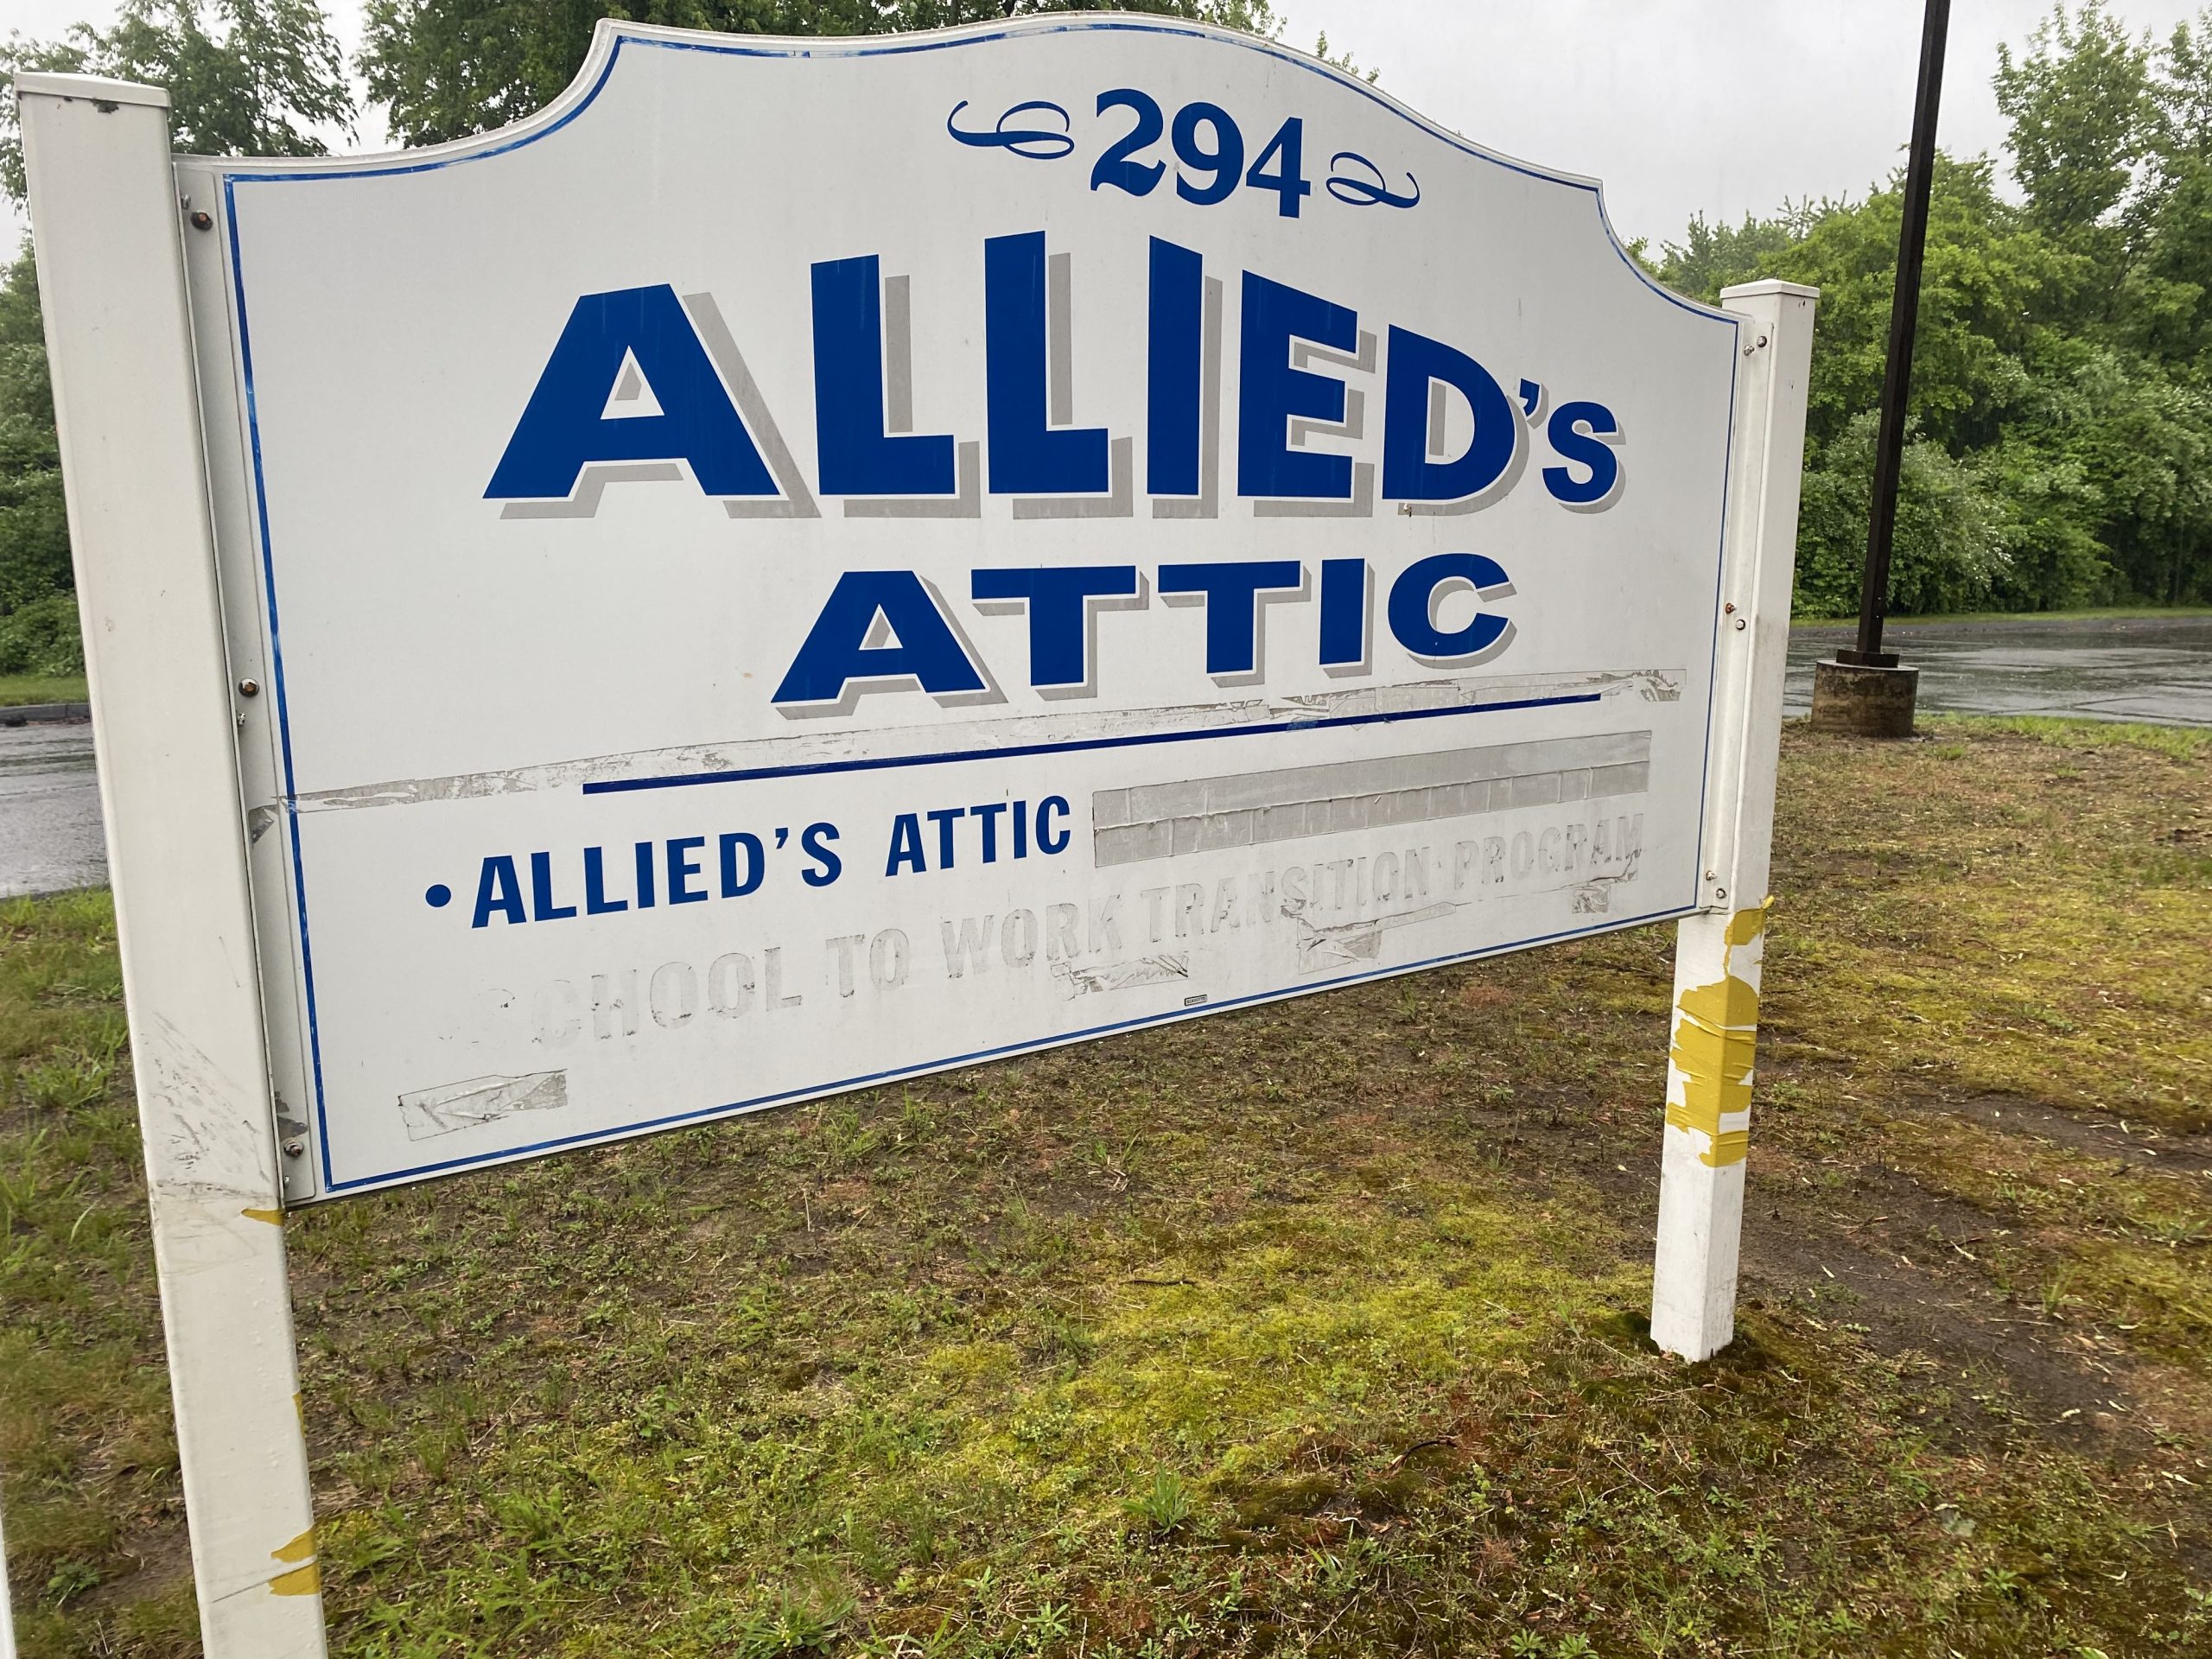 Photo of Allied's Attic post and panel sign before fixing